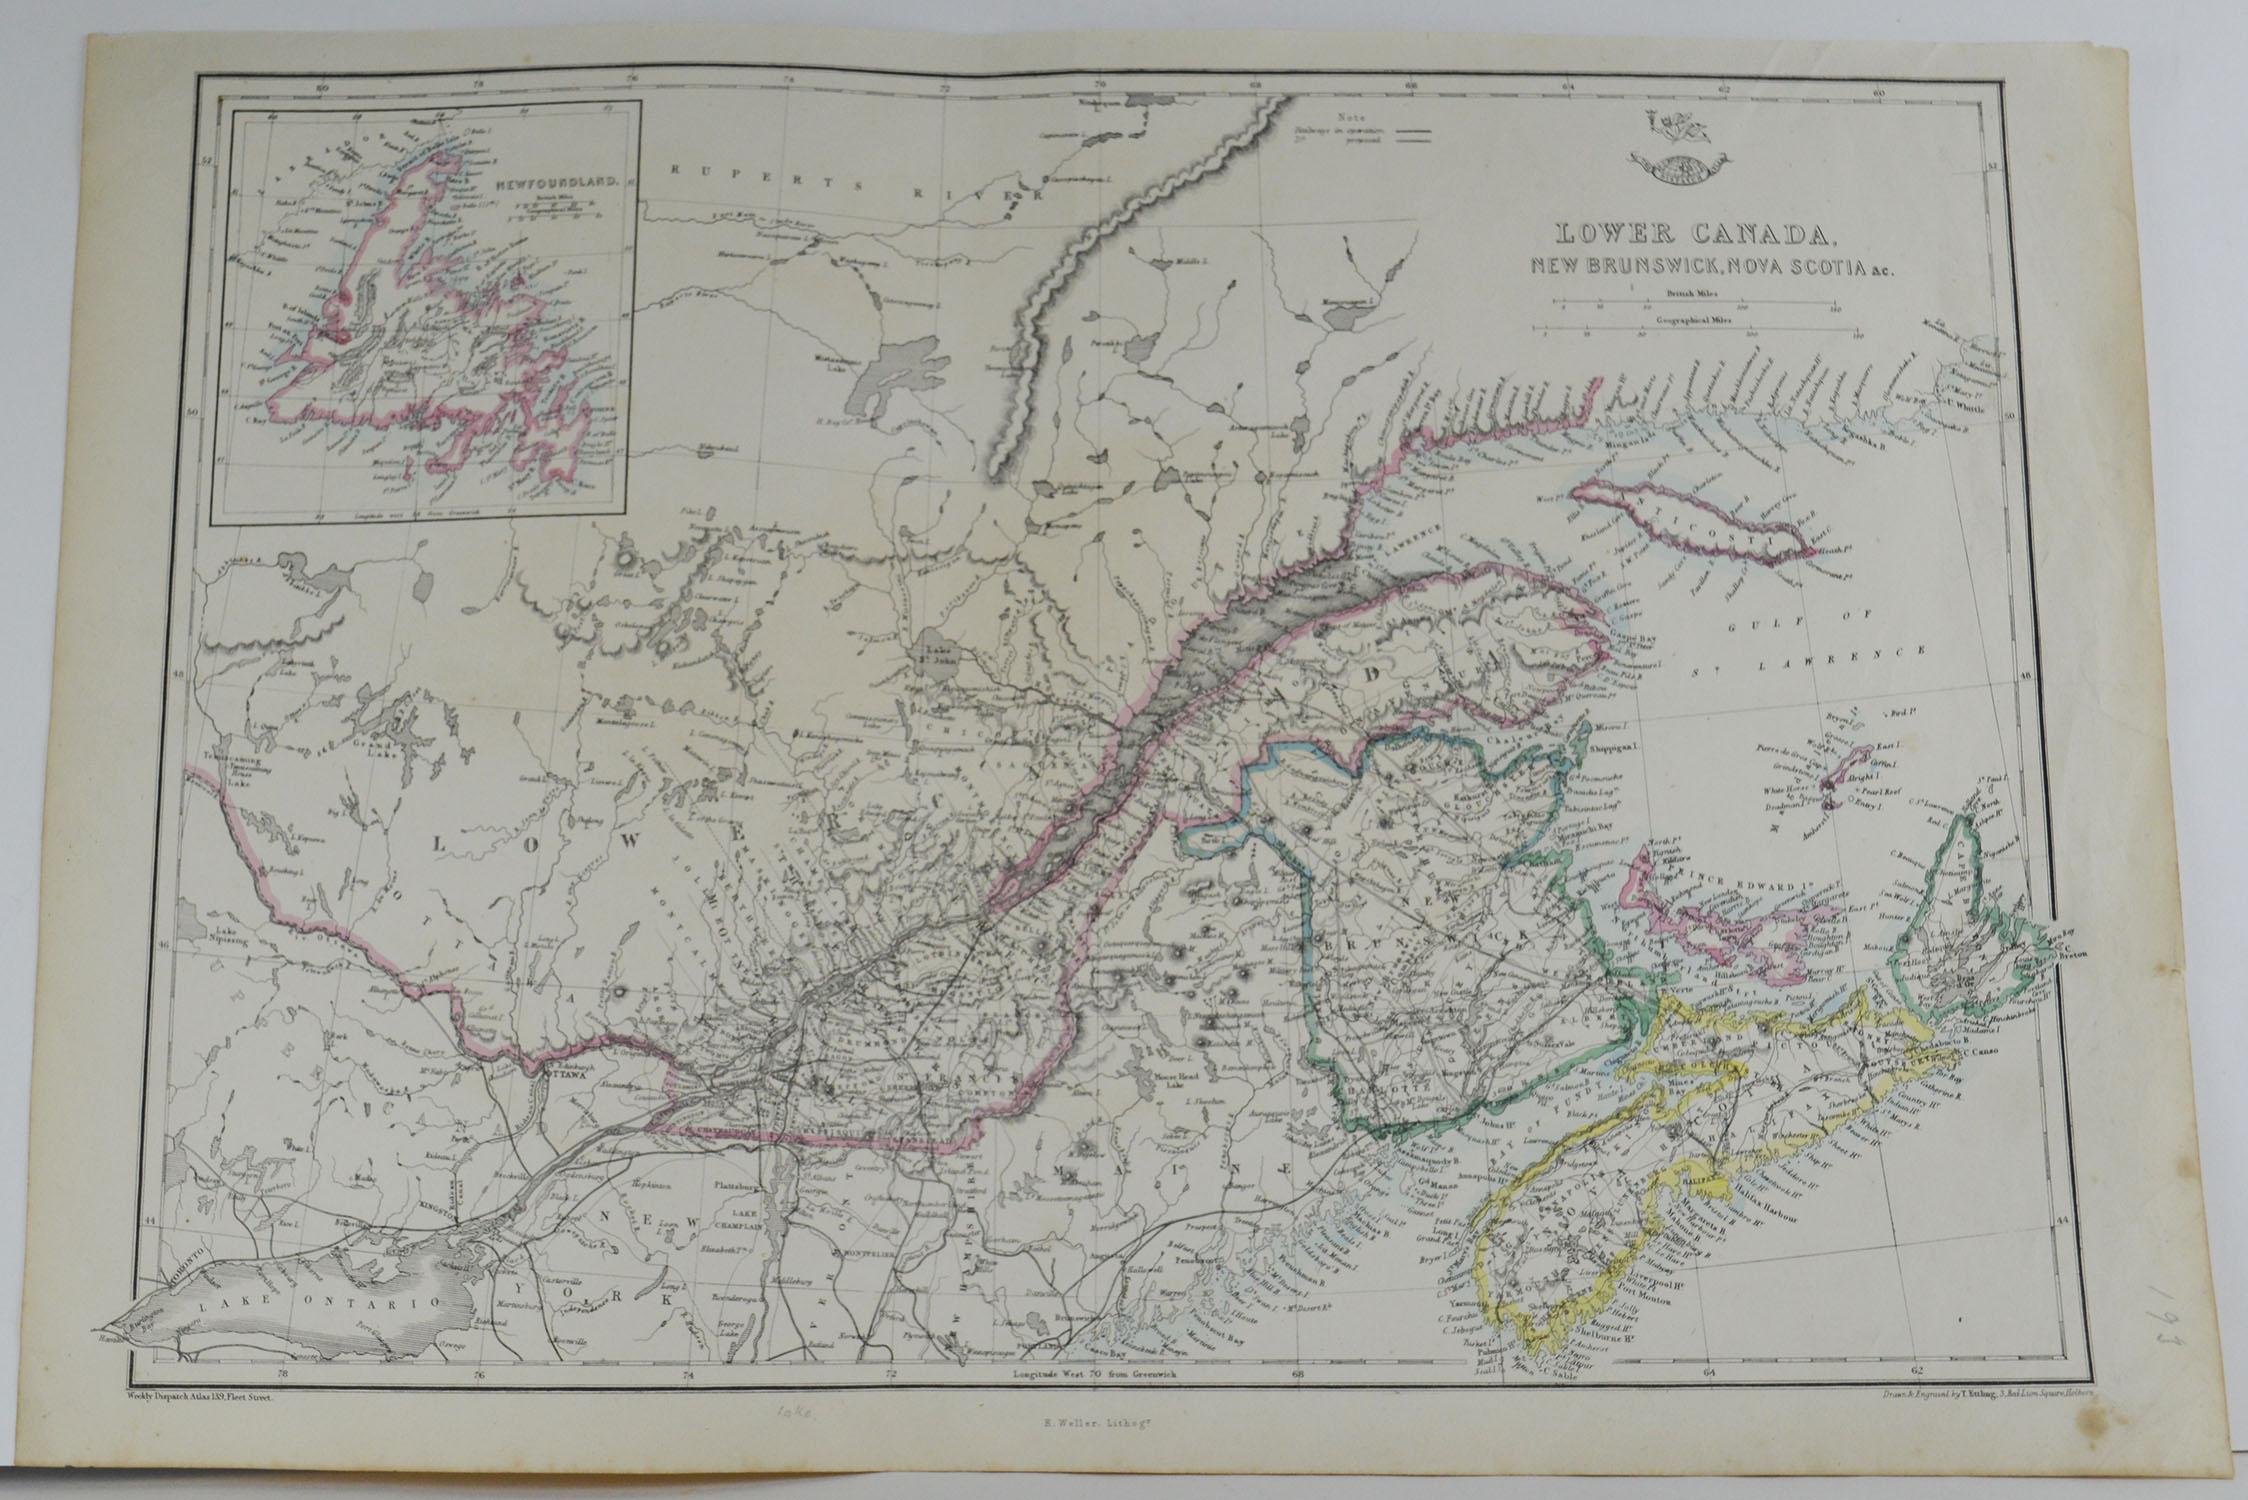 Great map of Canada

Steel engraving with original color outline

Drawn and engraved by T. Ettling

Published in the weekly Dispatch Atlas, 1861

Unframed.
  